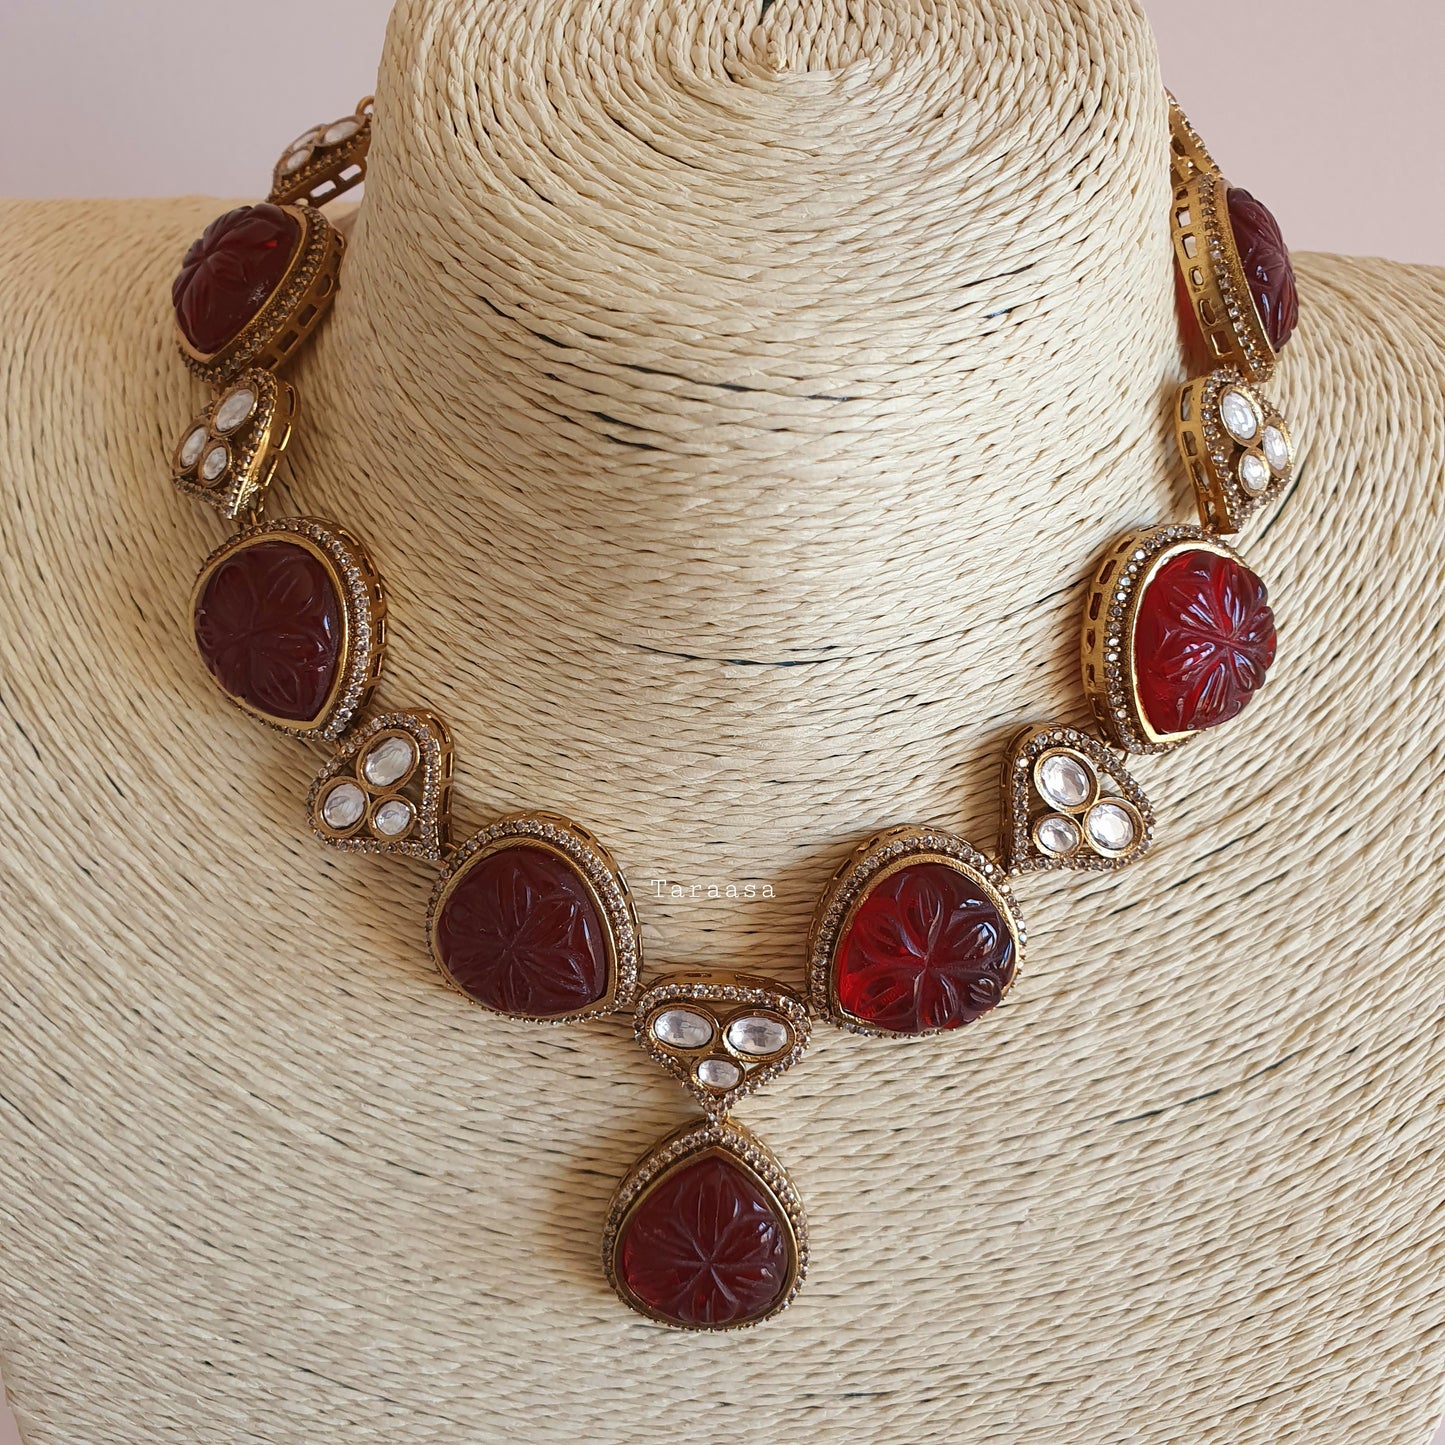 Monalisa Necklace Set - Red